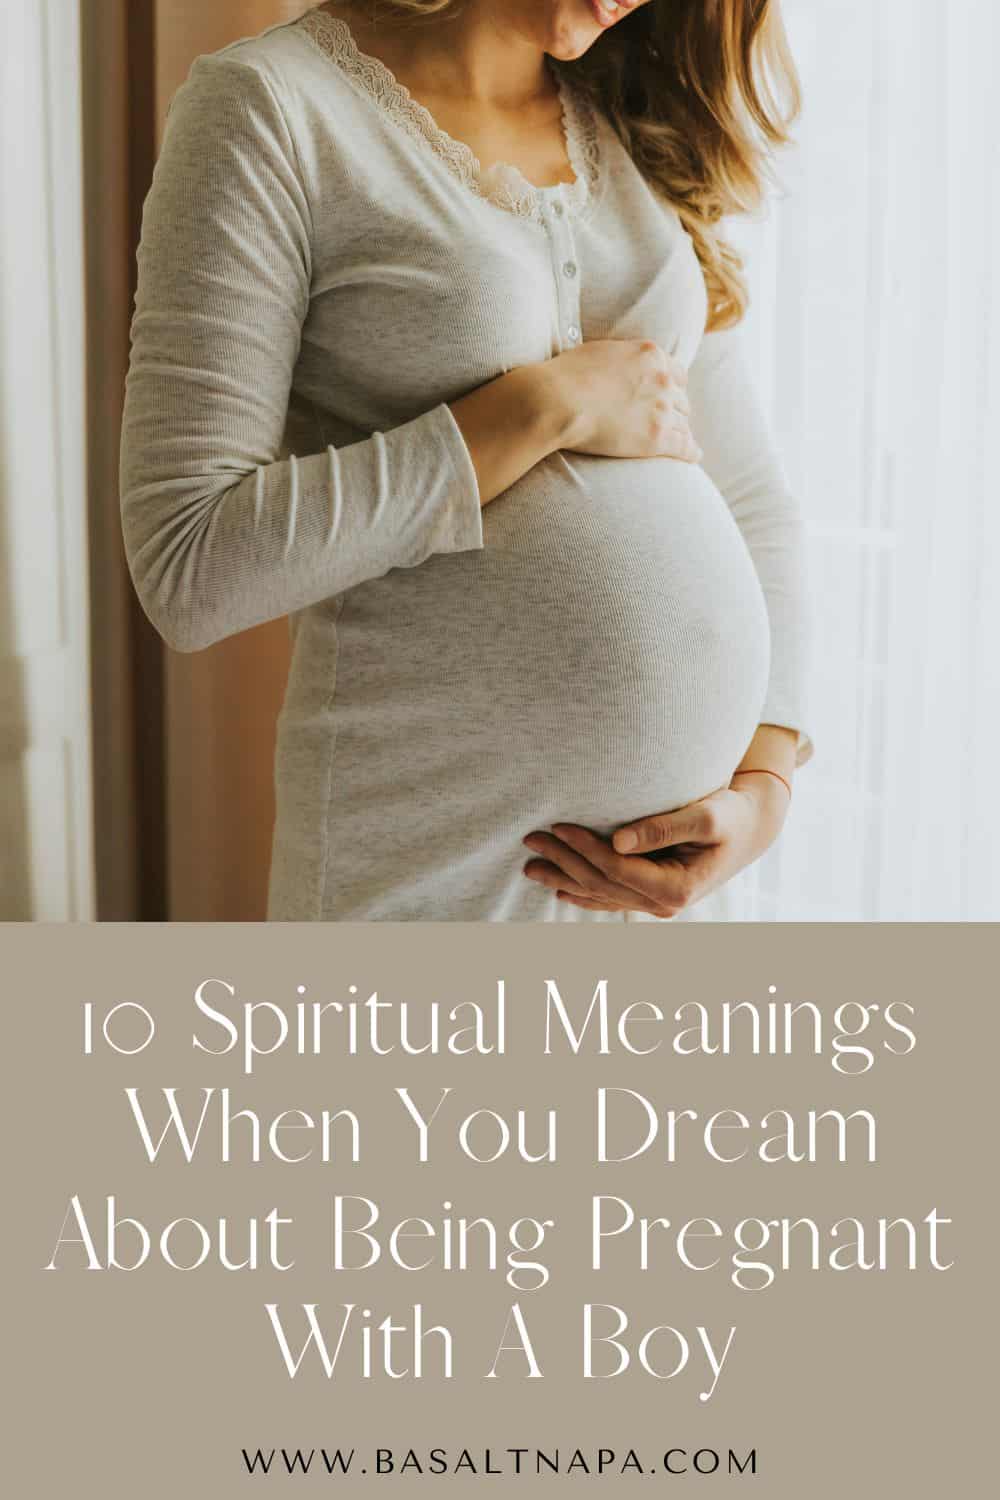 What does it mean when you dream about being pregnant with a boy?